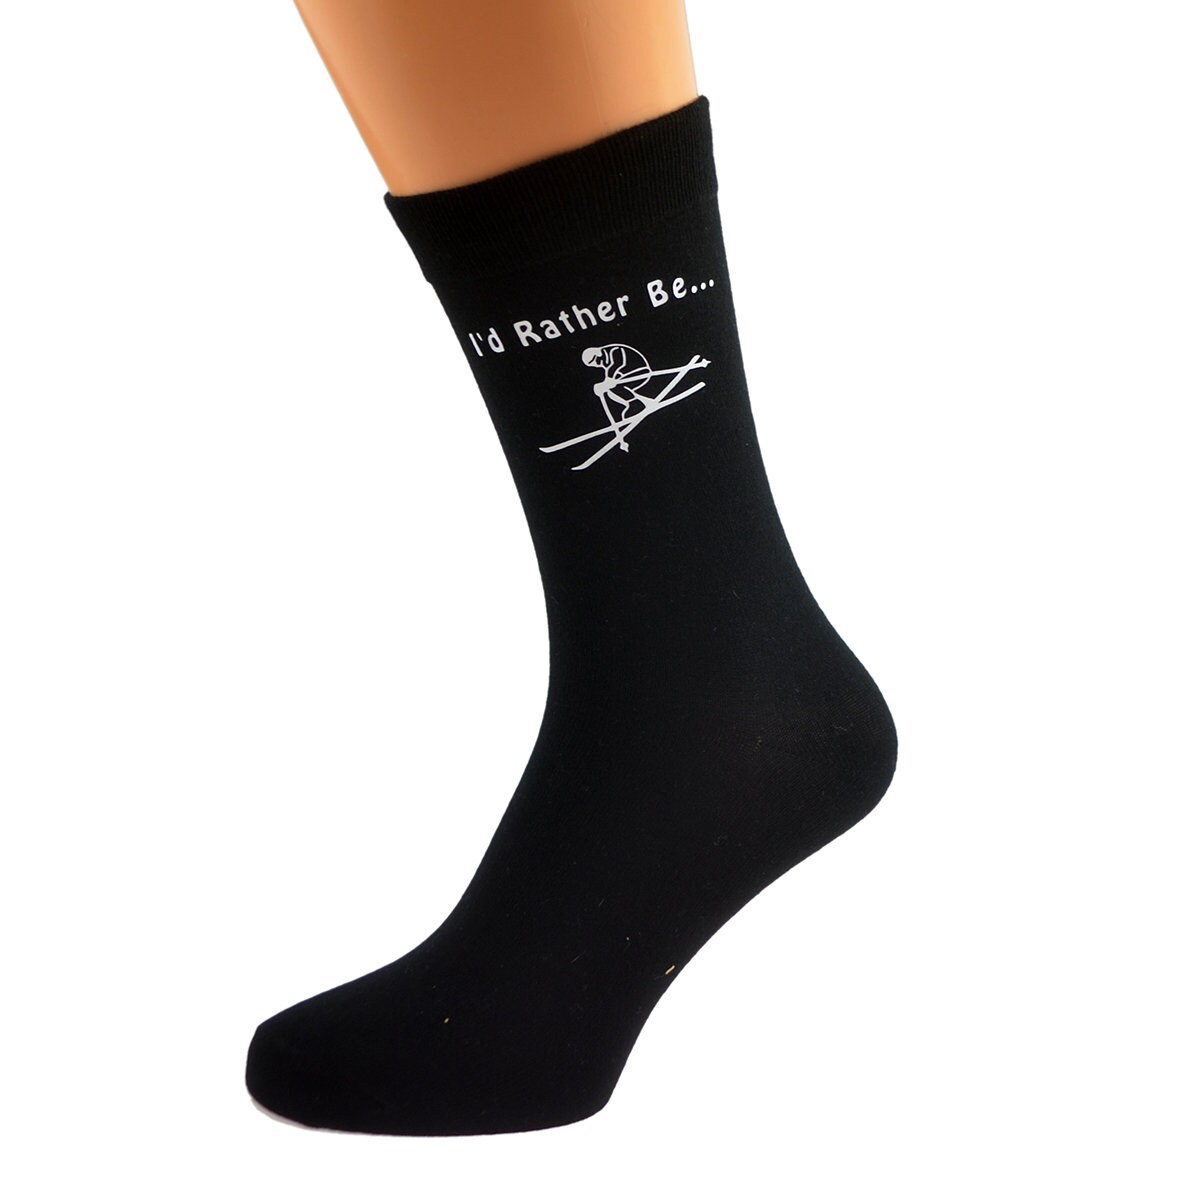 I’d Rather Be Skiing With Skier Image Printed in White Vinyl On Mens Black Cotton Rich Socks. One Size, UK 8-12